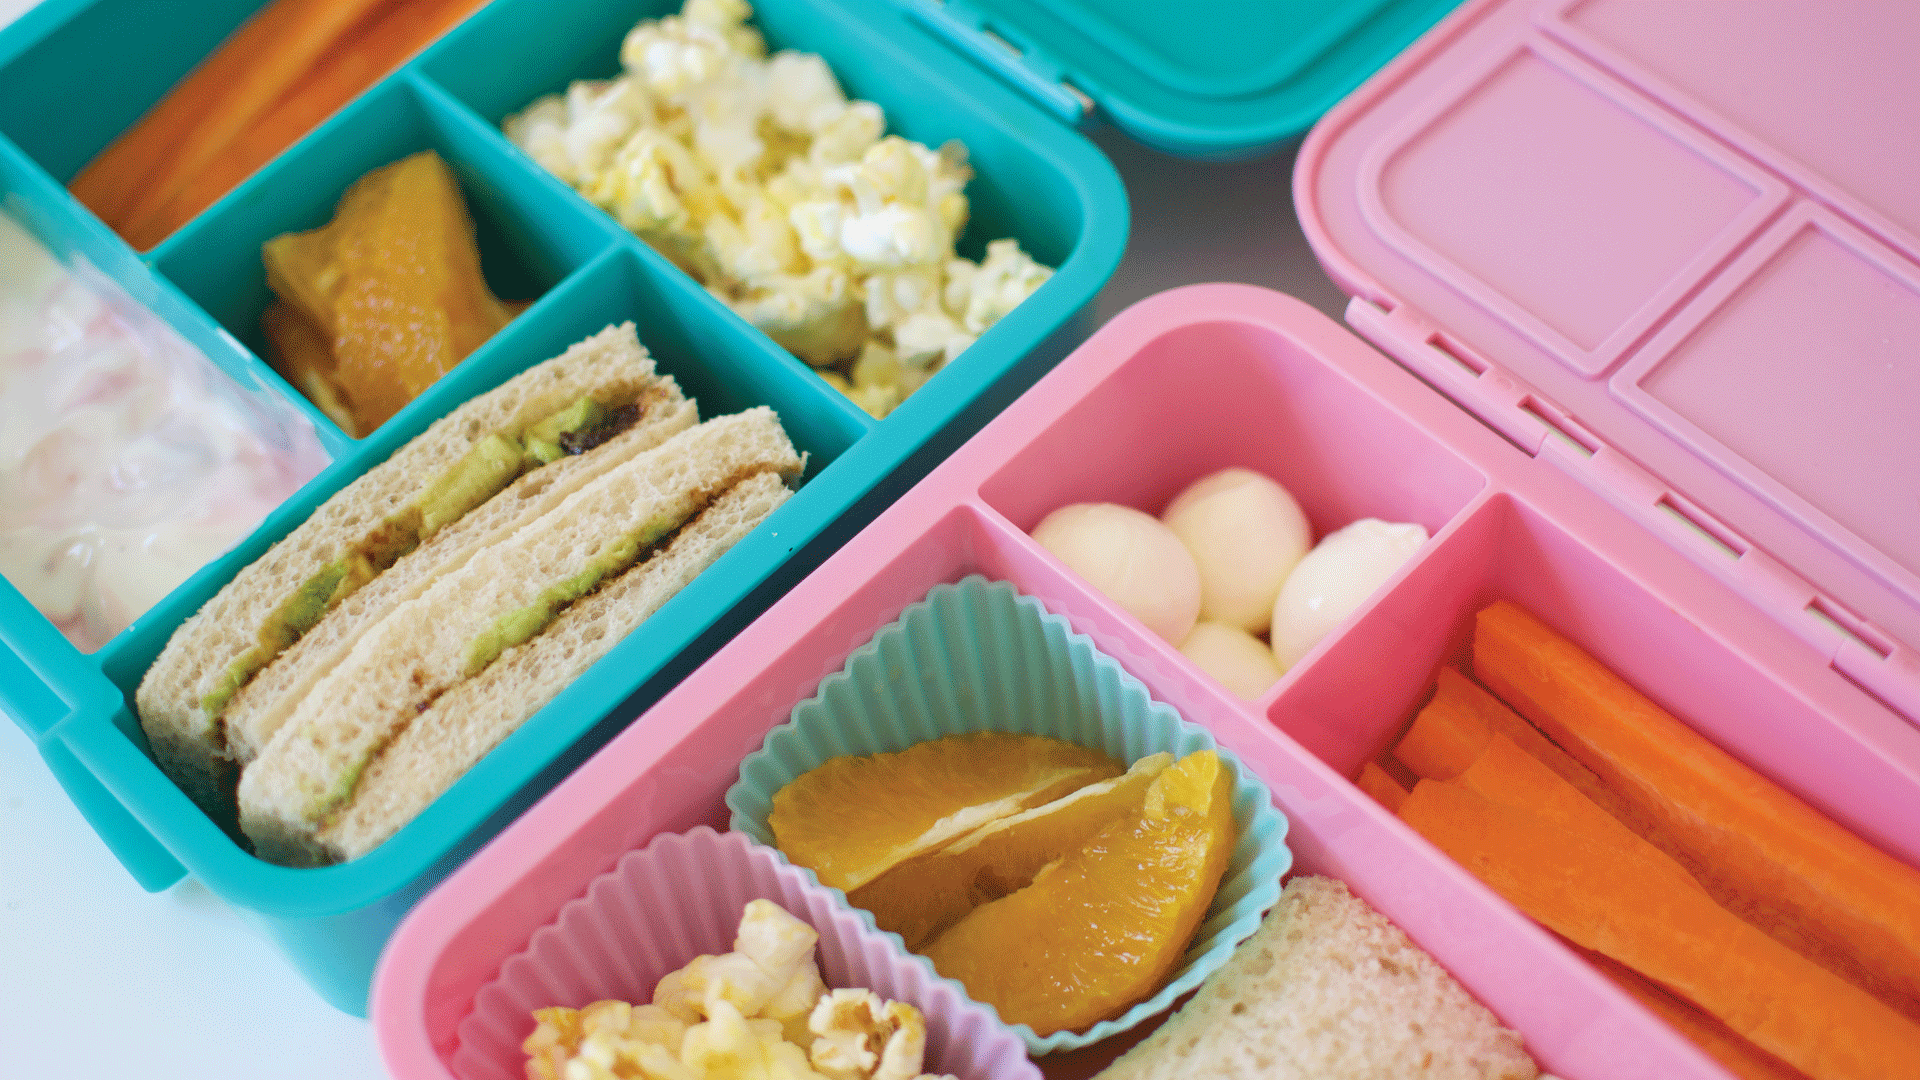 70 Things to Put In Your Kids’ Bento Box